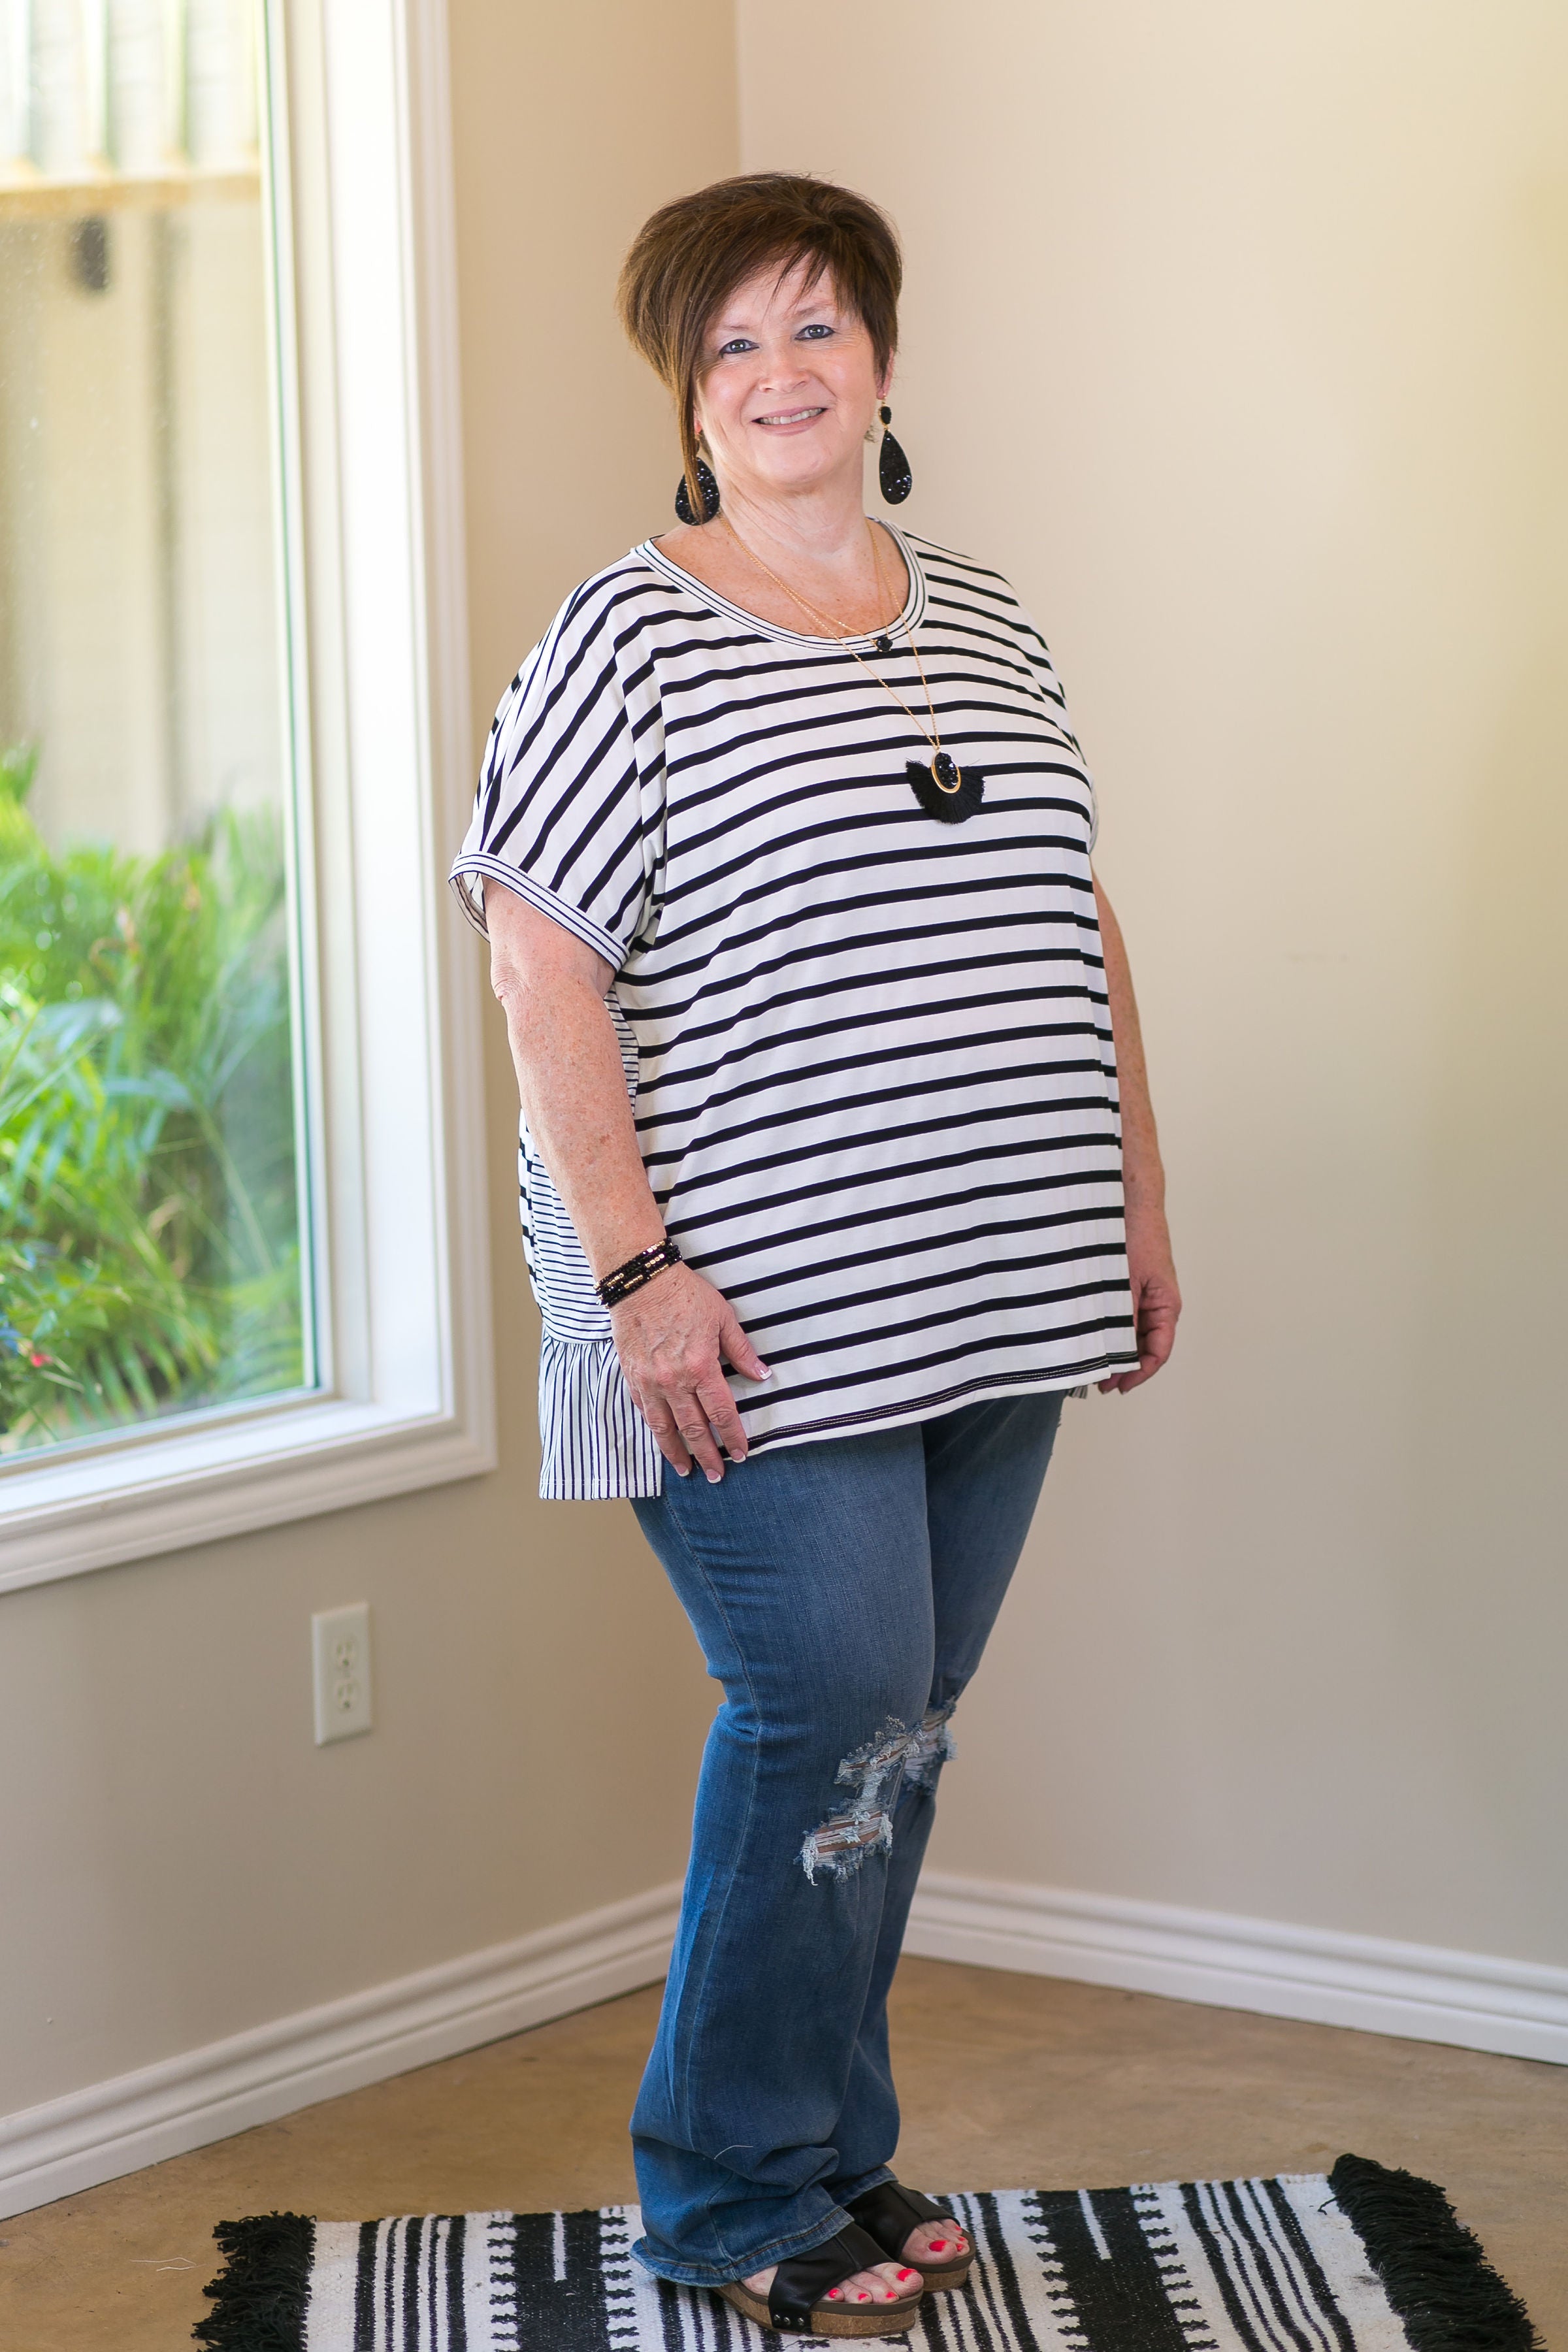 Umgee Notice Me Mixed Stripe Short Sleeve Top with Ruffled Hem in black and white Blue Women's trendy plus size boutique clothing affordable striped